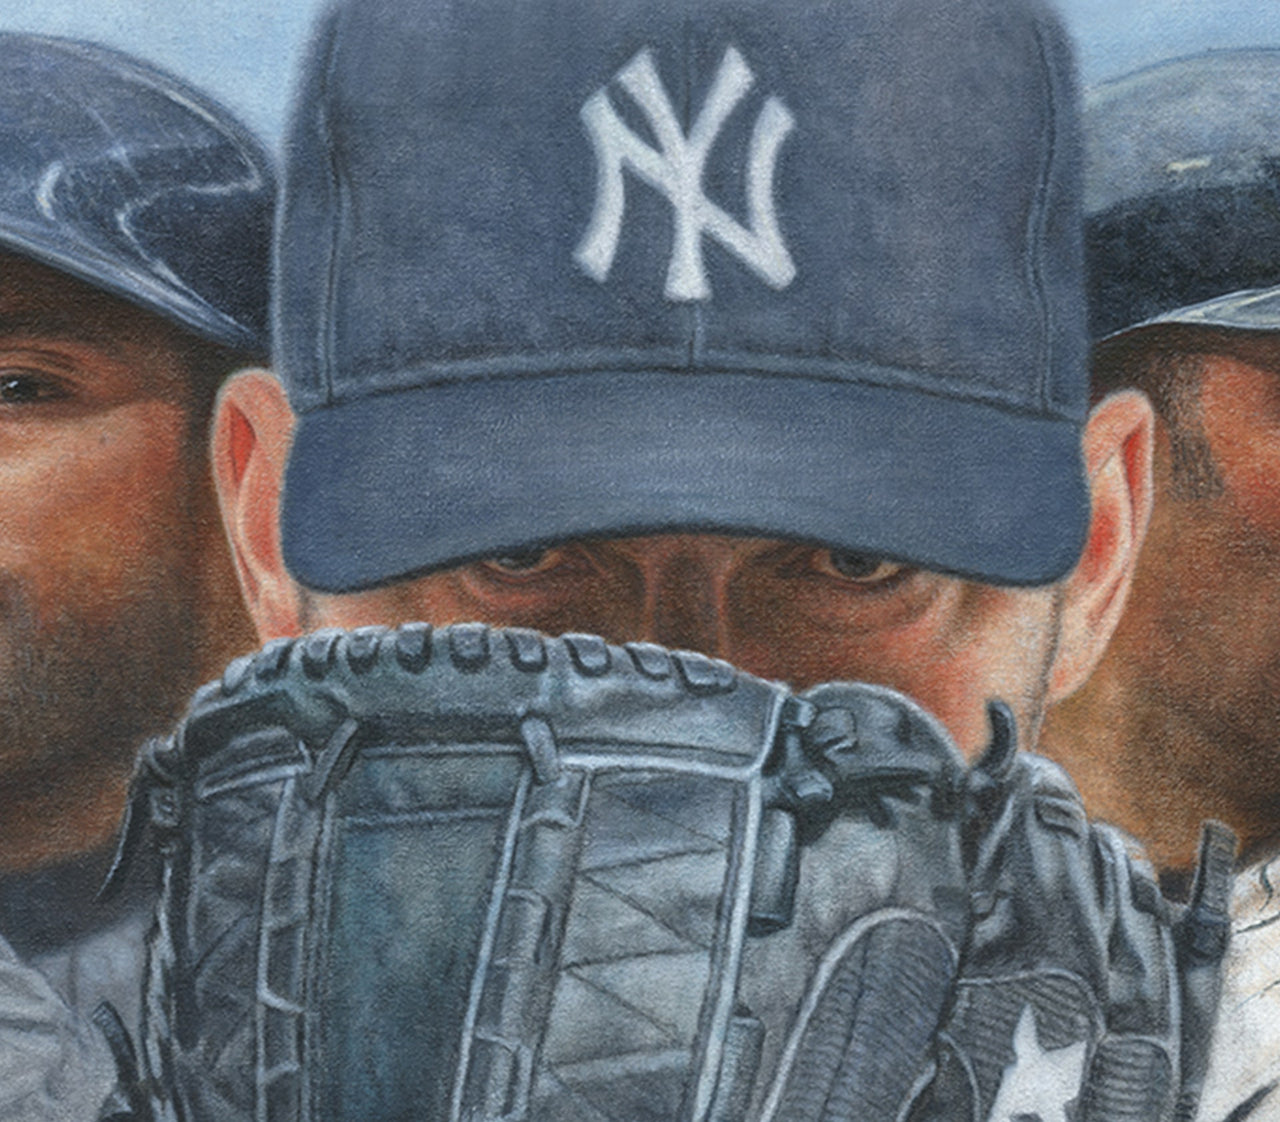 "Homegrown Champions" - A Tribute to the NY Yankees Core 5